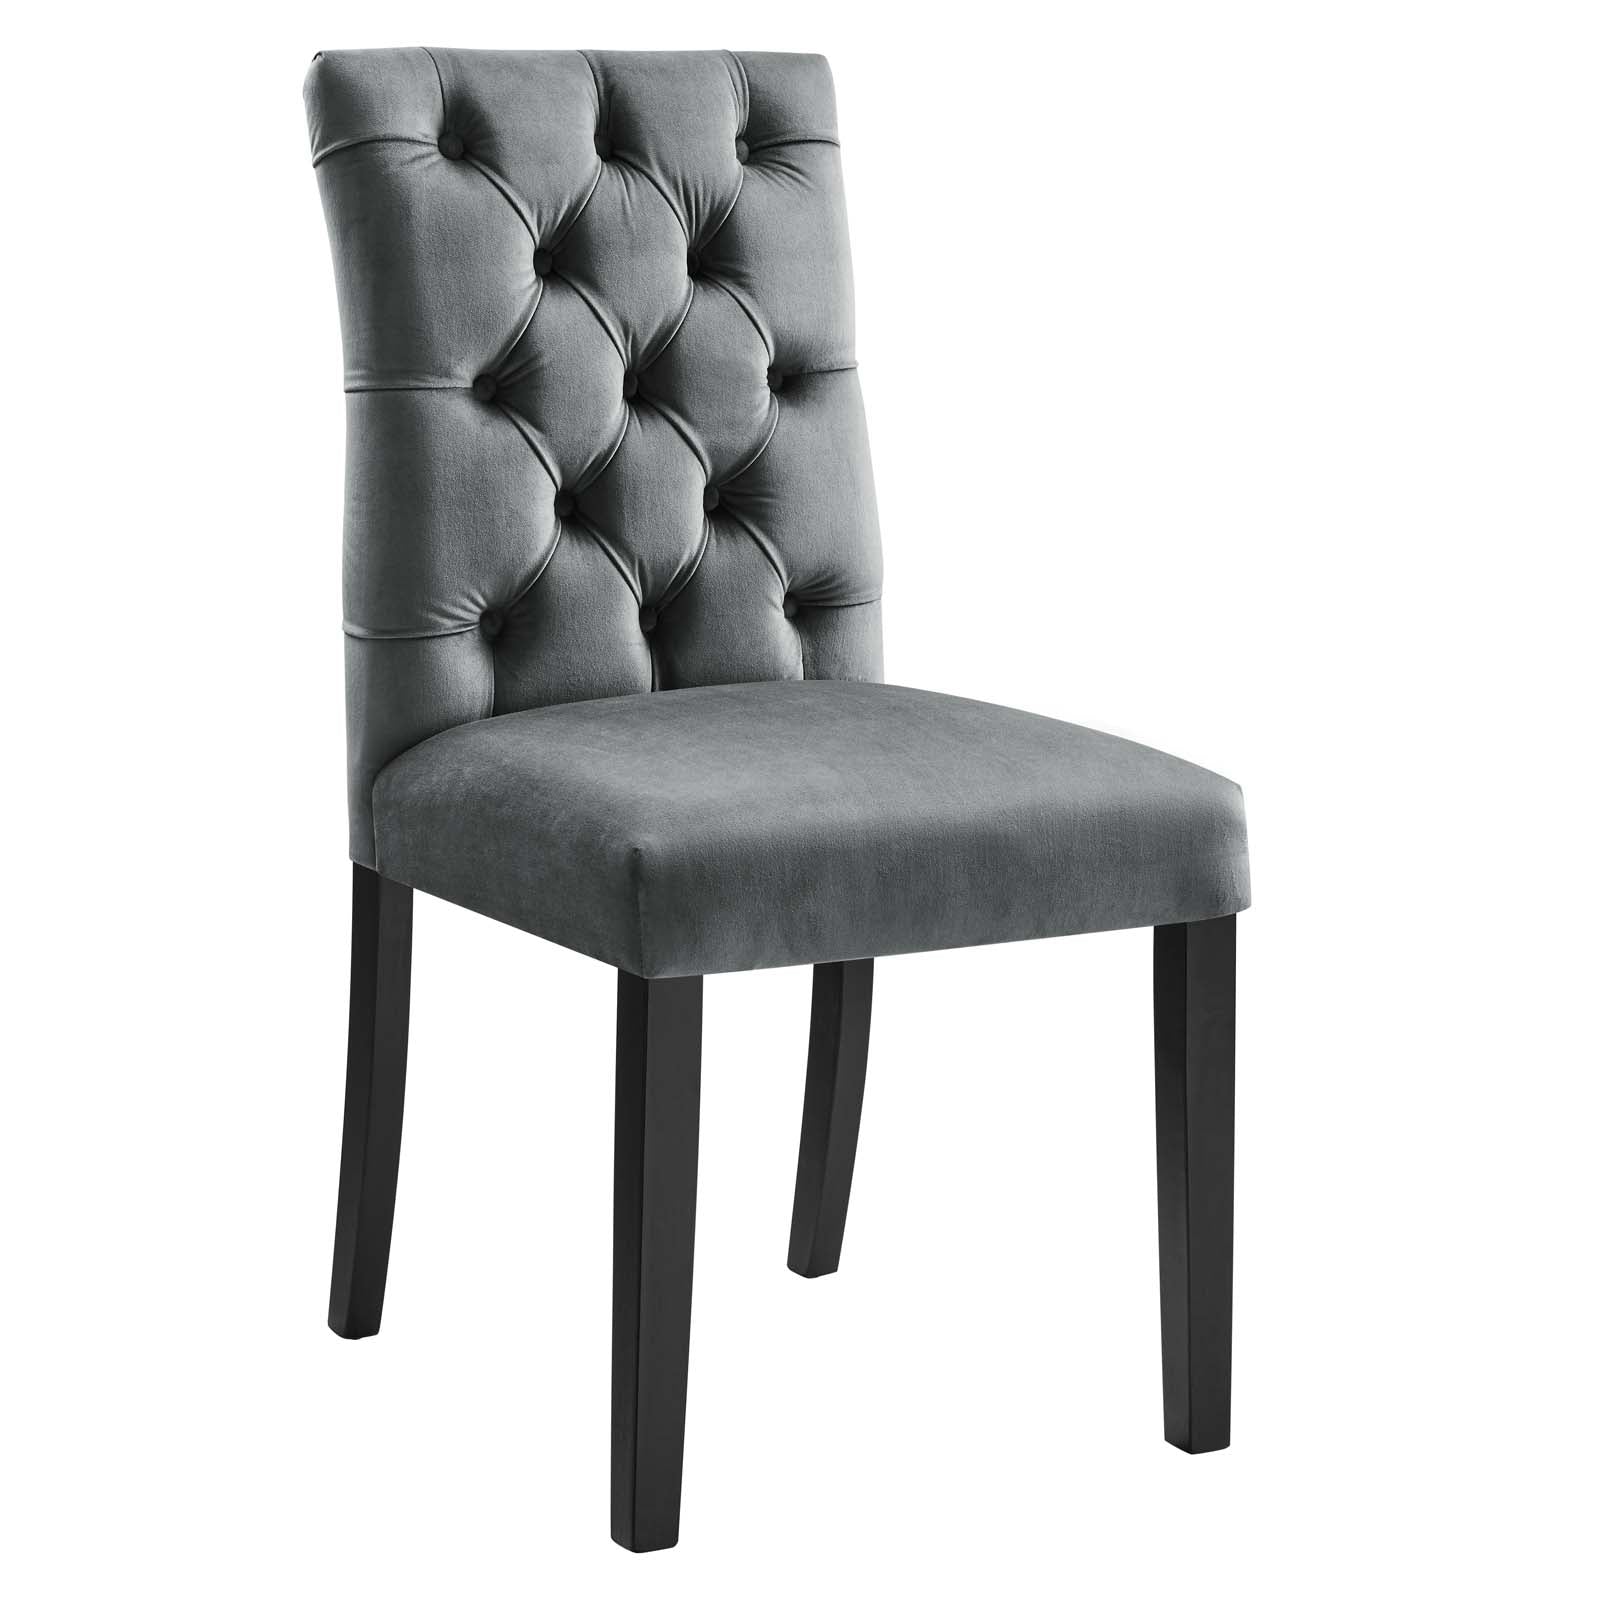 Duchess Performance Velvet Dining Chairs - Set of 2-Dining Chair-Modway-Wall2Wall Furnishings